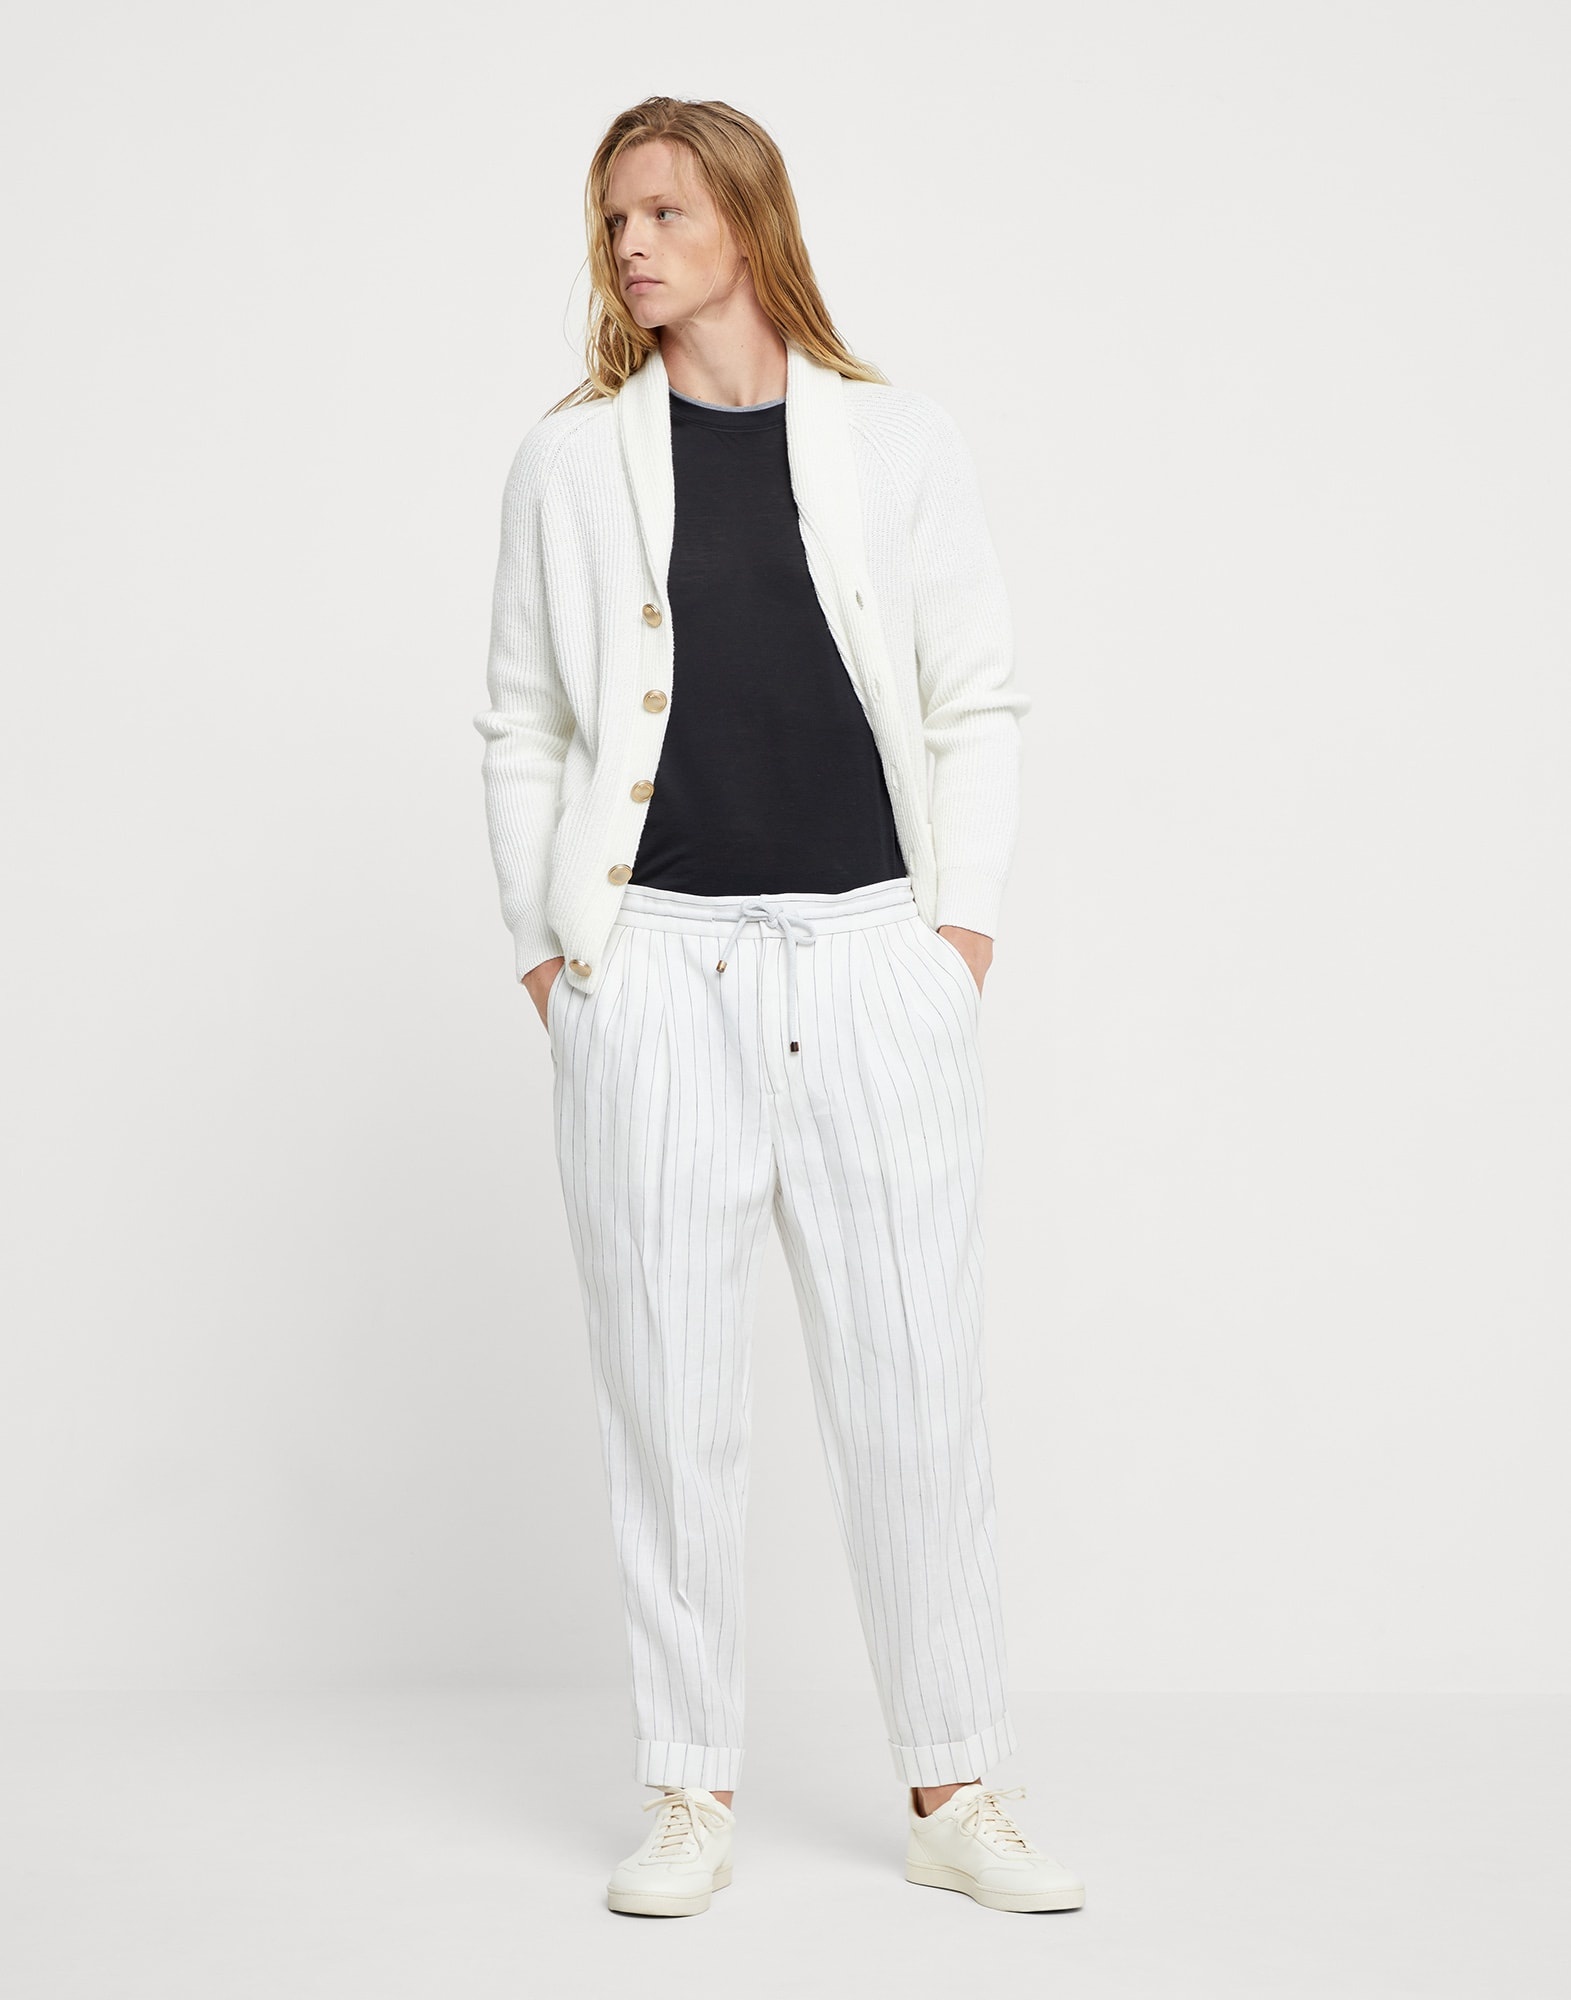 Linen chalk stripe leisure fit trousers with drawstring and double pleats - 4